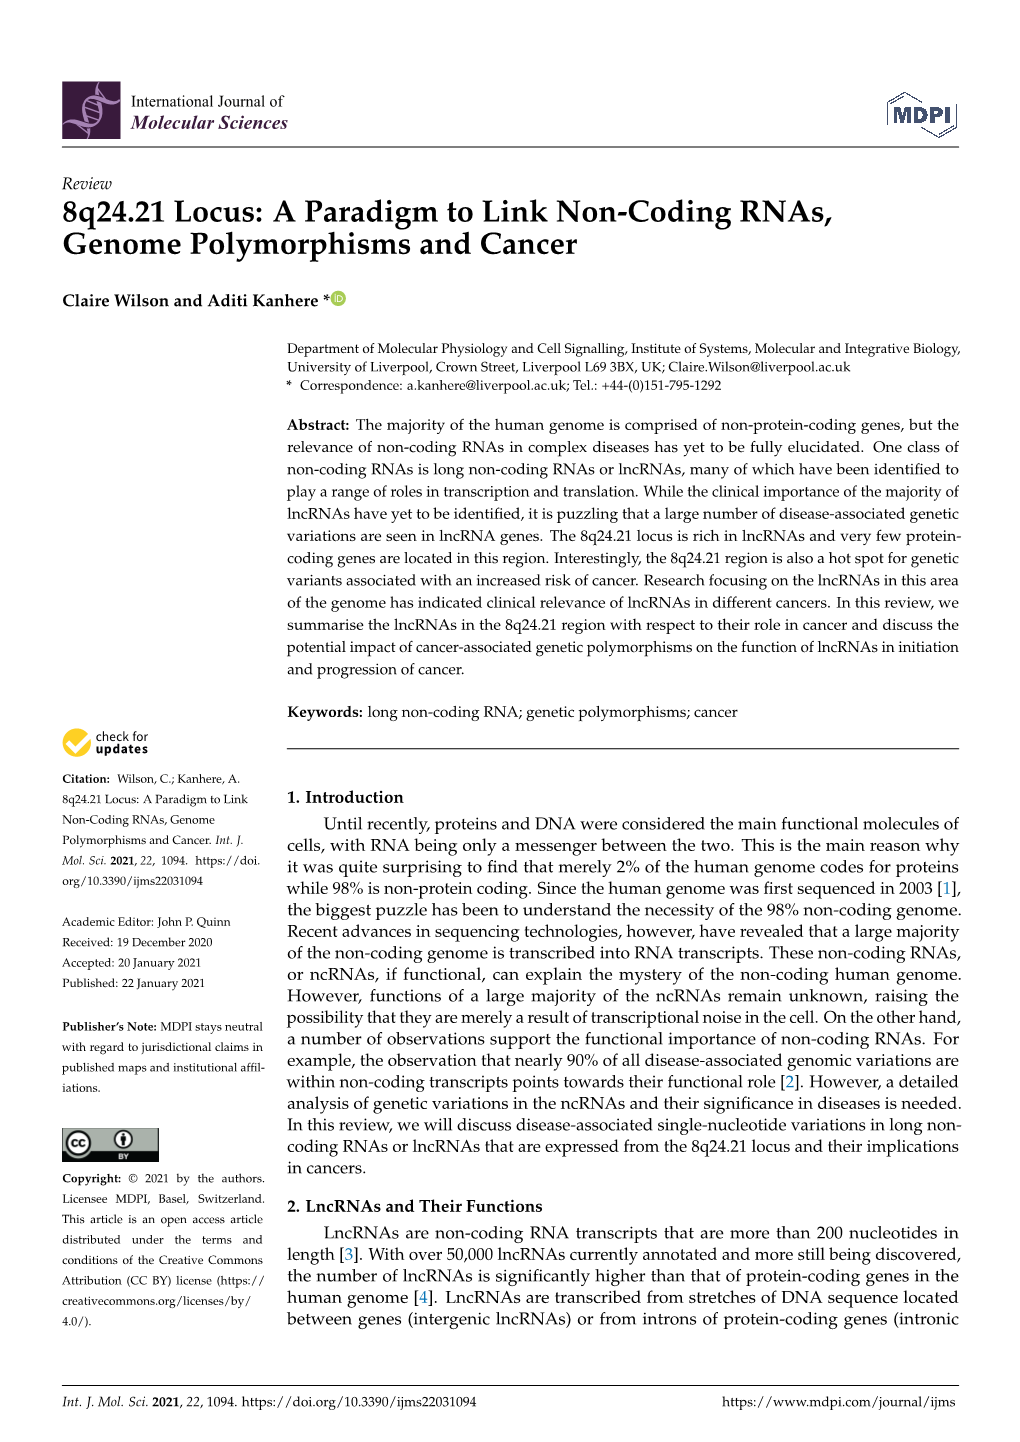 8Q24.21 Locus: a Paradigm to Link Non-Coding Rnas, Genome Polymorphisms and Cancer